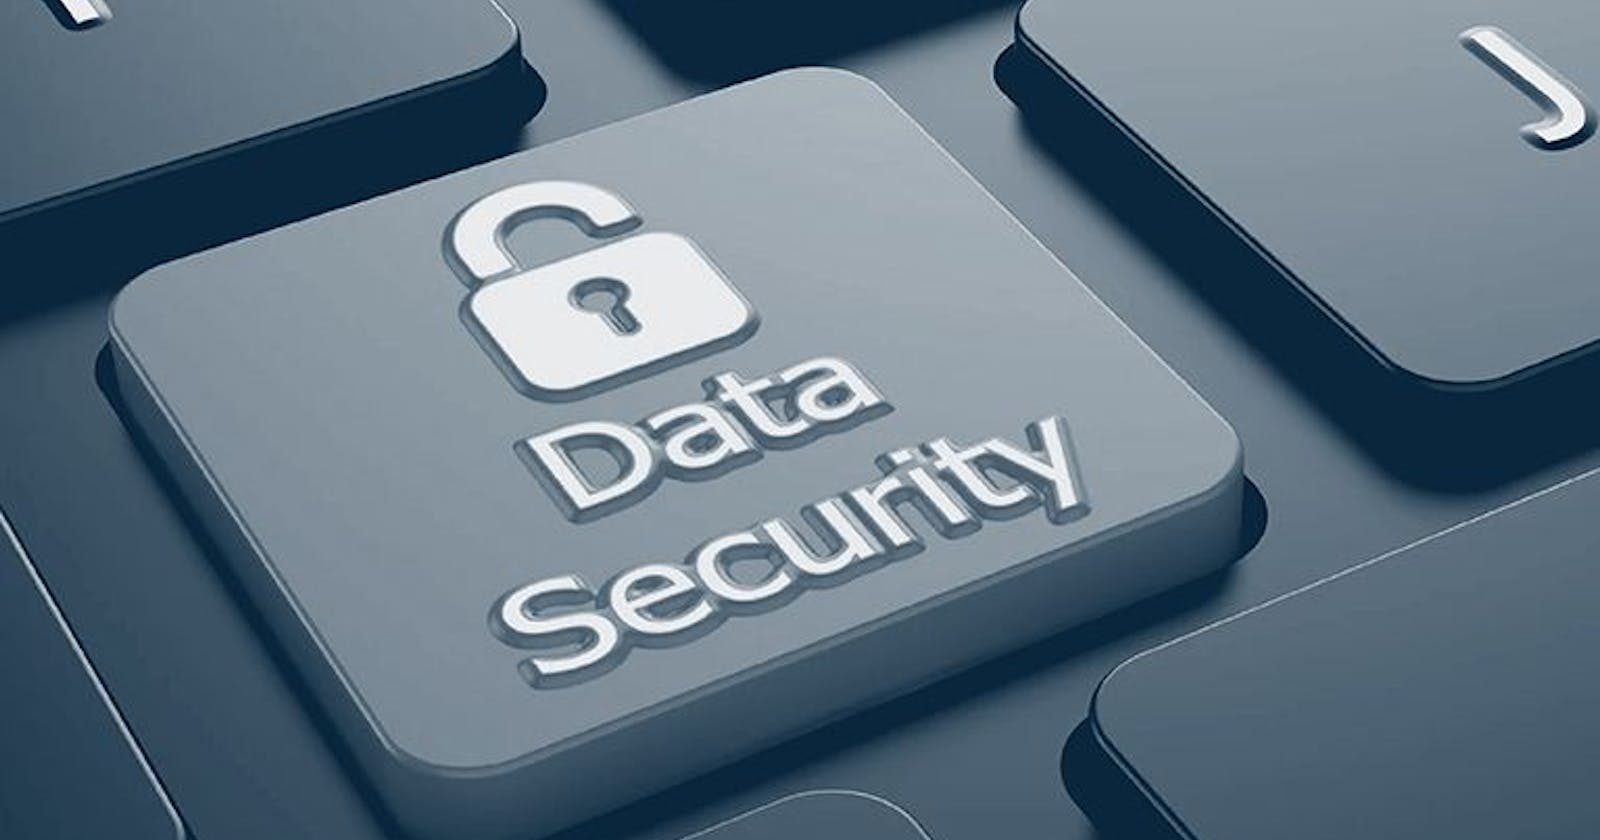 9 Best Practices in DataSecurity For 2021